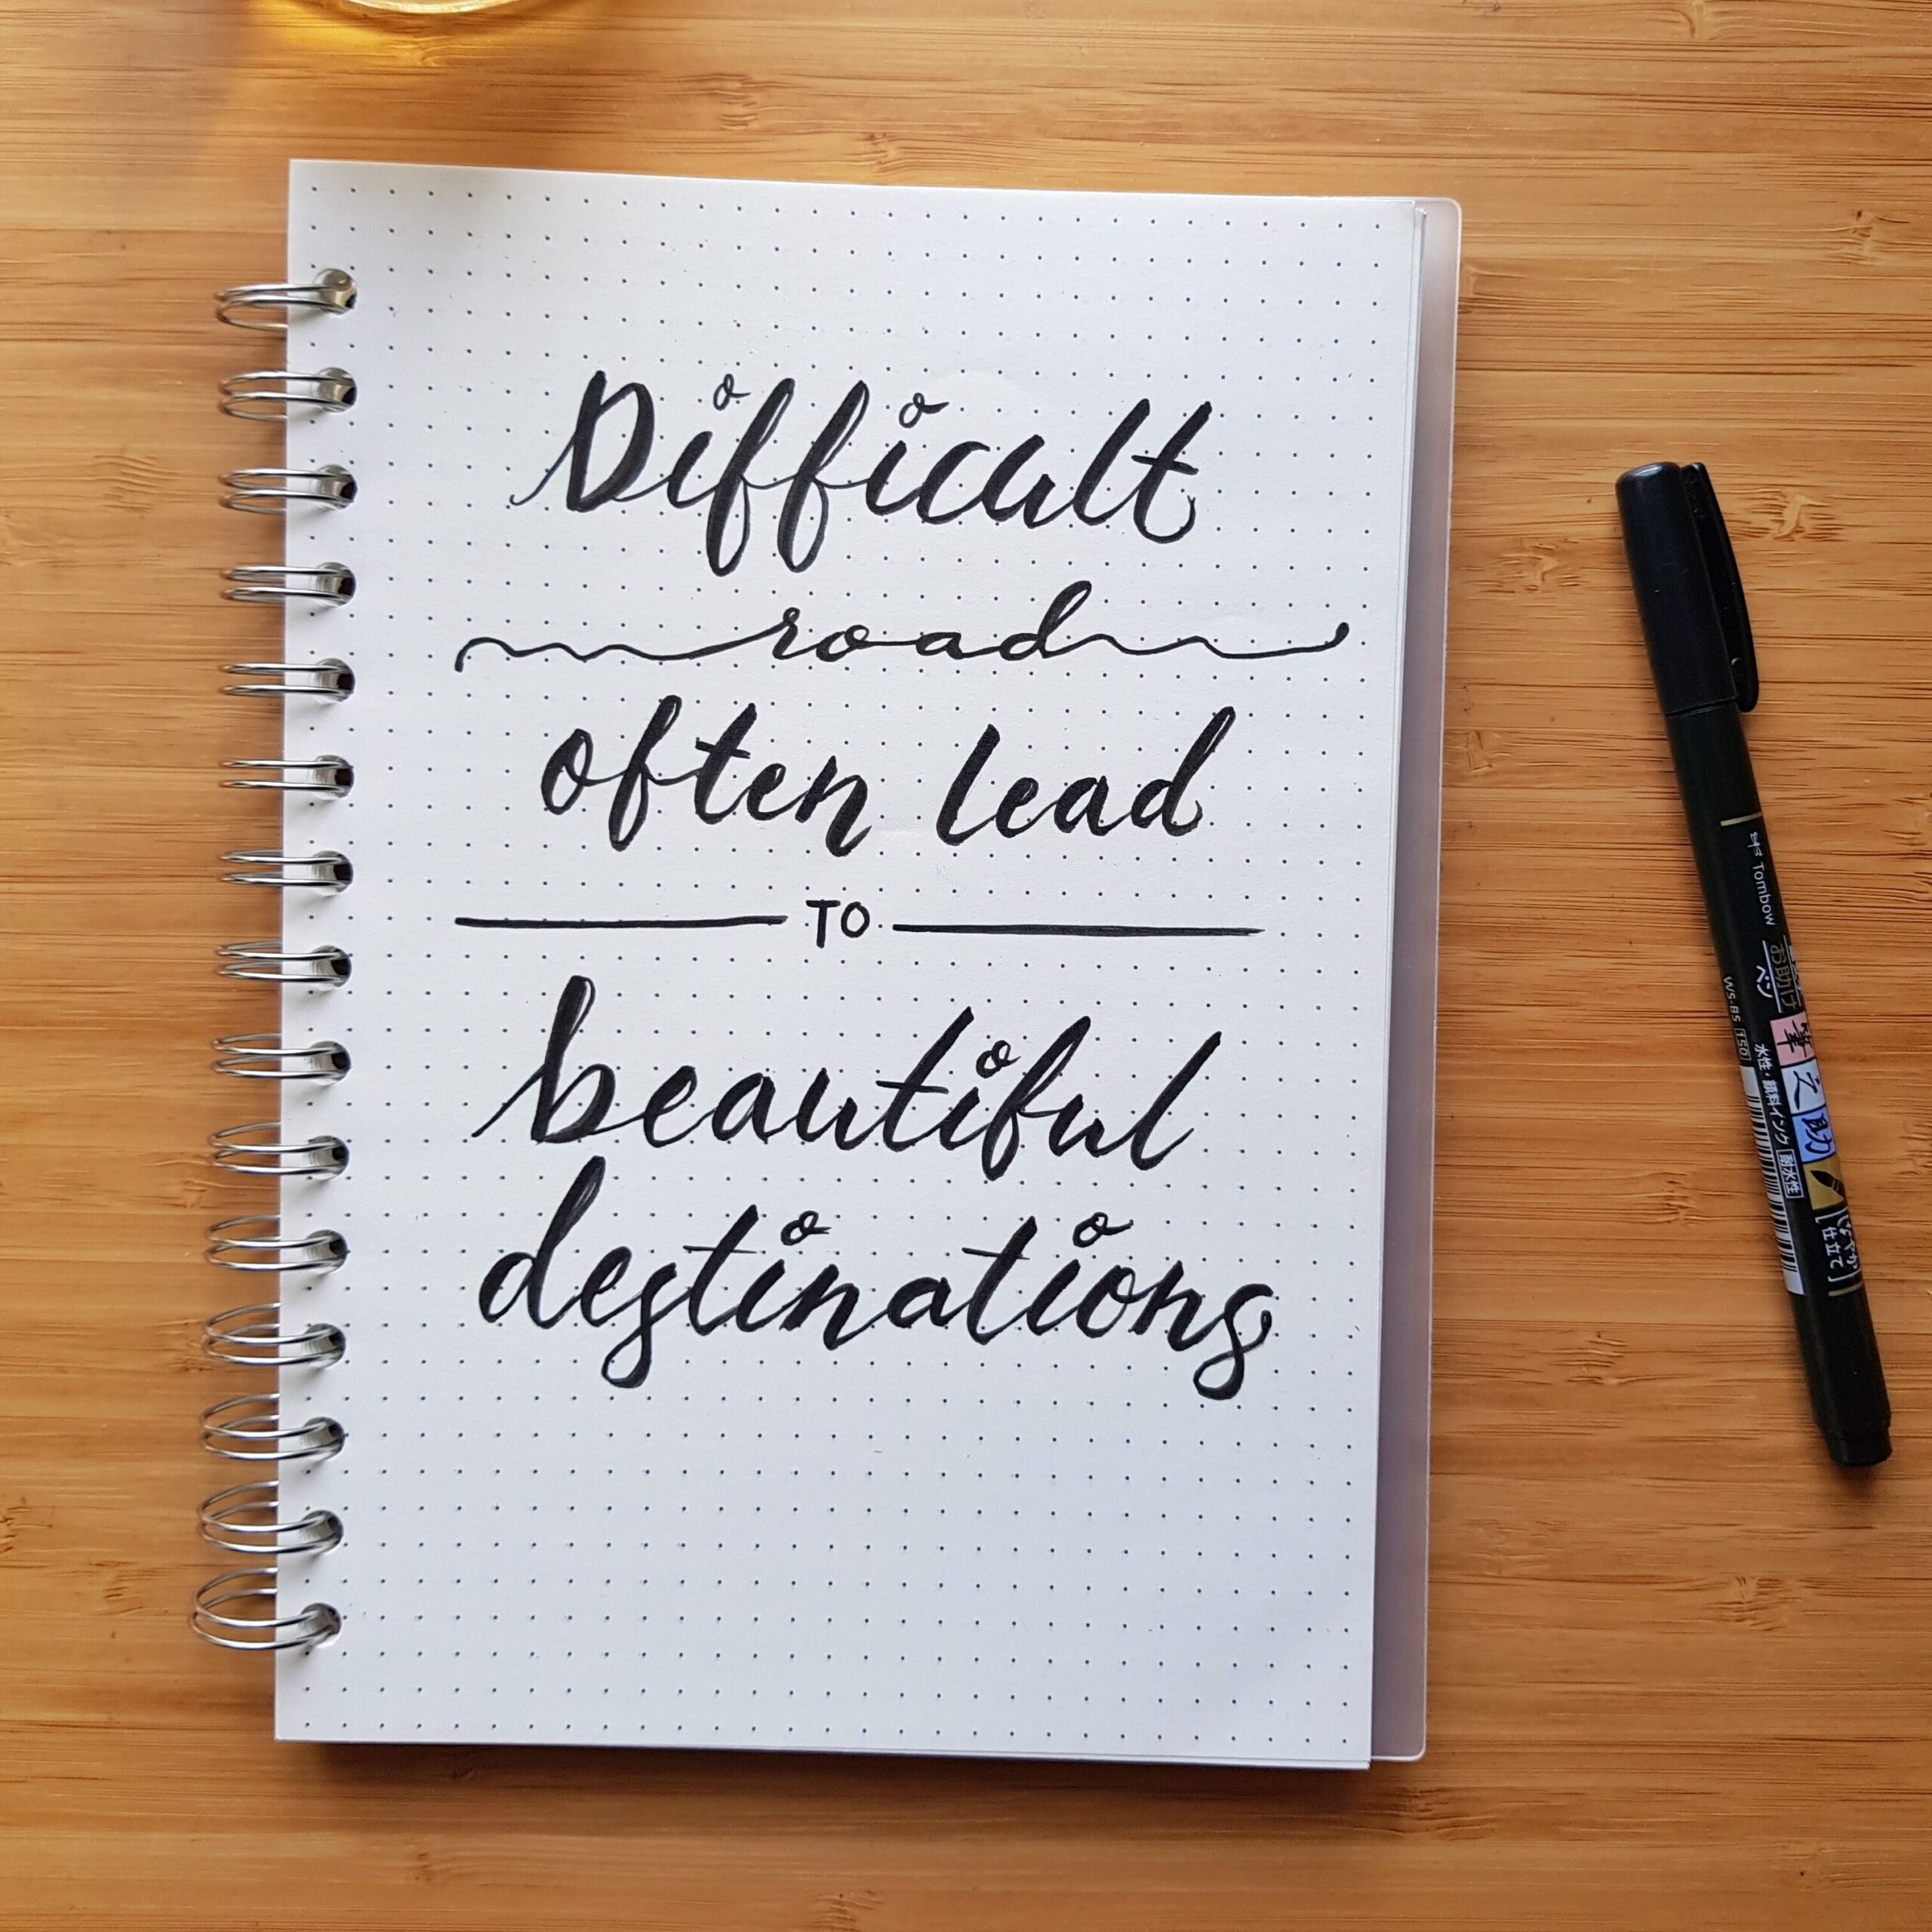 Motivational quotes. Journaling and mental health in 20s